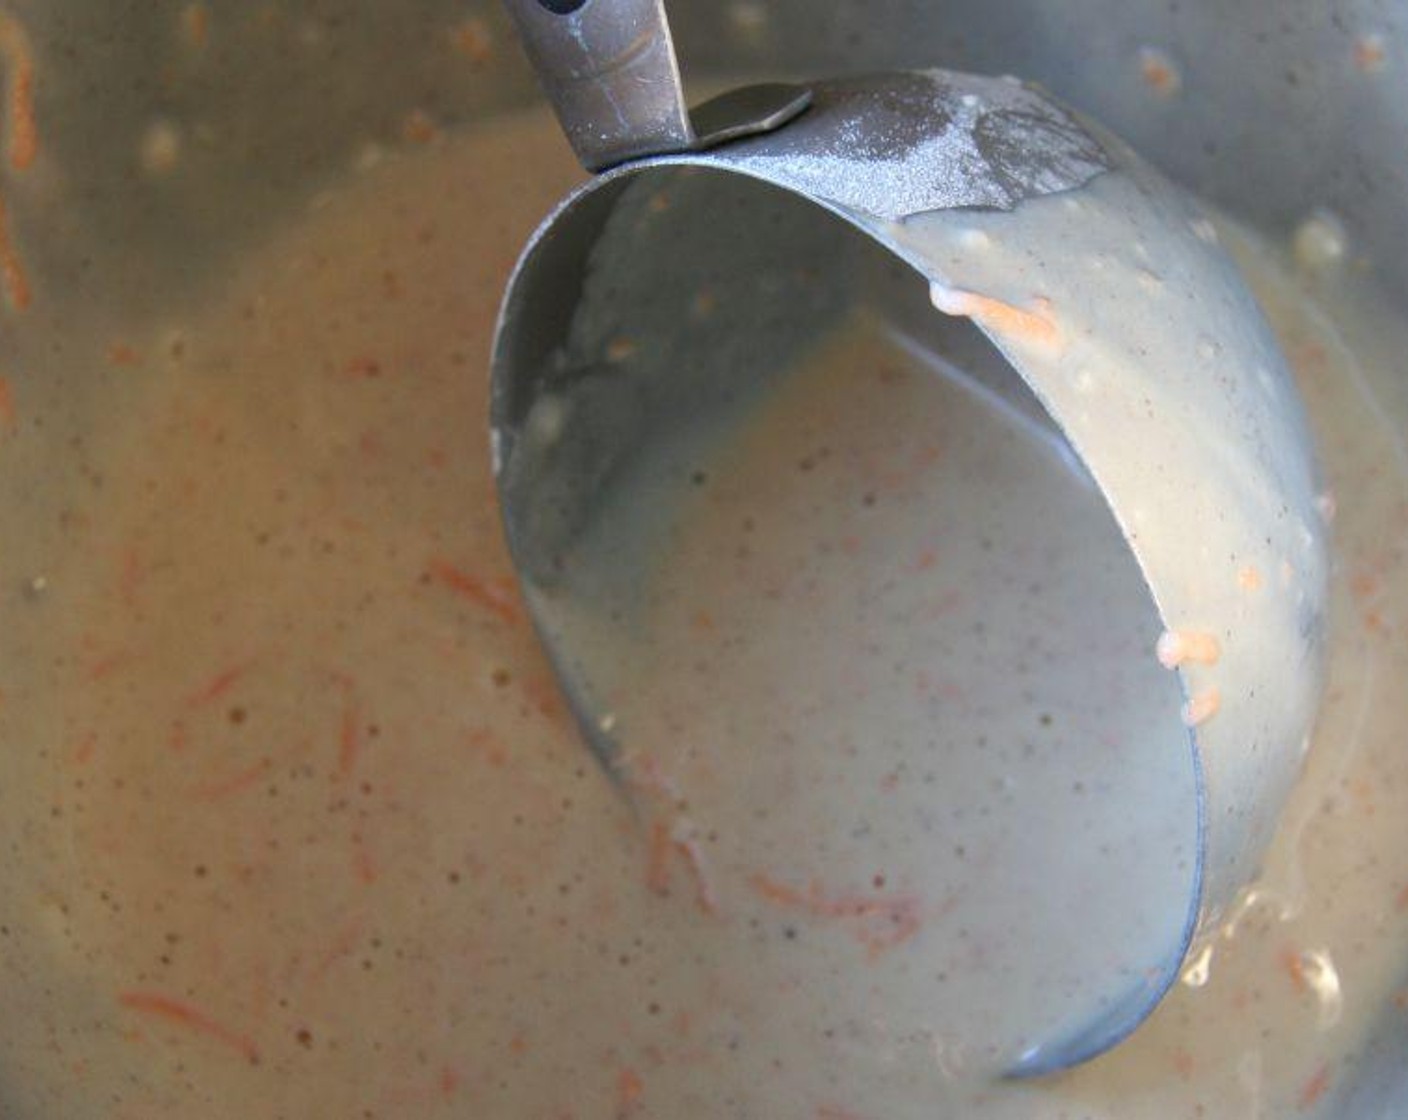 step 2 Add Milk (2 cups), Eggs (2), and Canola Oil (2 Tbsp), mix just until combined. Stir in the Sweet Potato (1/2 cup).